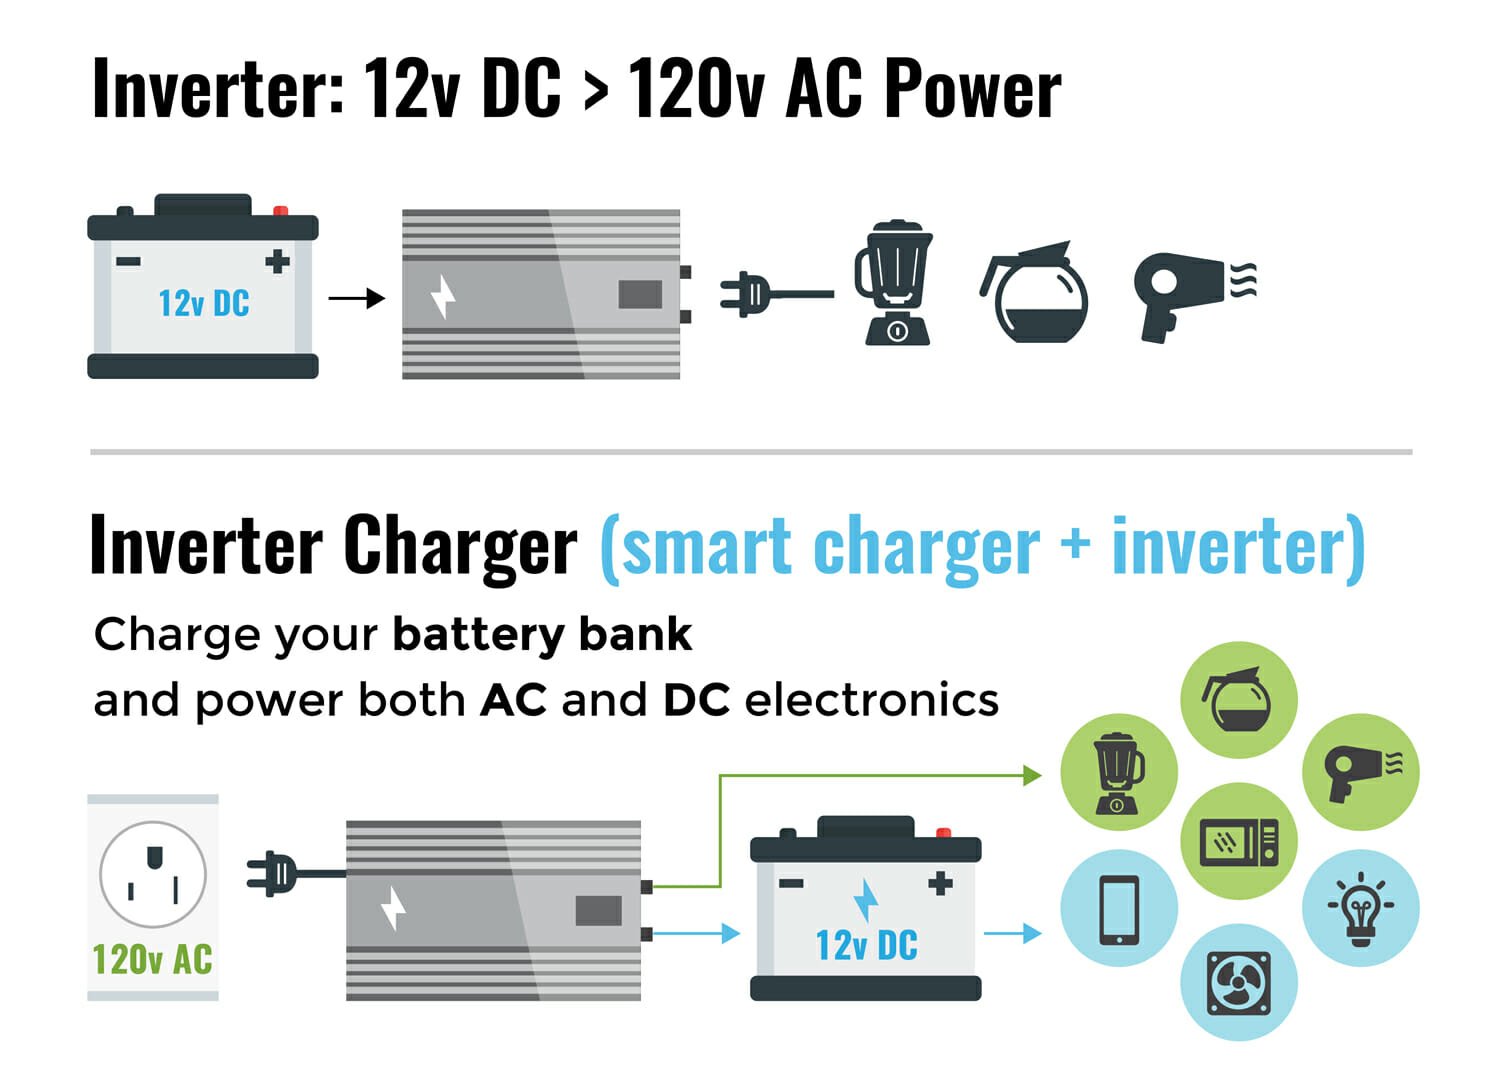 differences between an inverter and an inverter/charger for an RV or motorhome